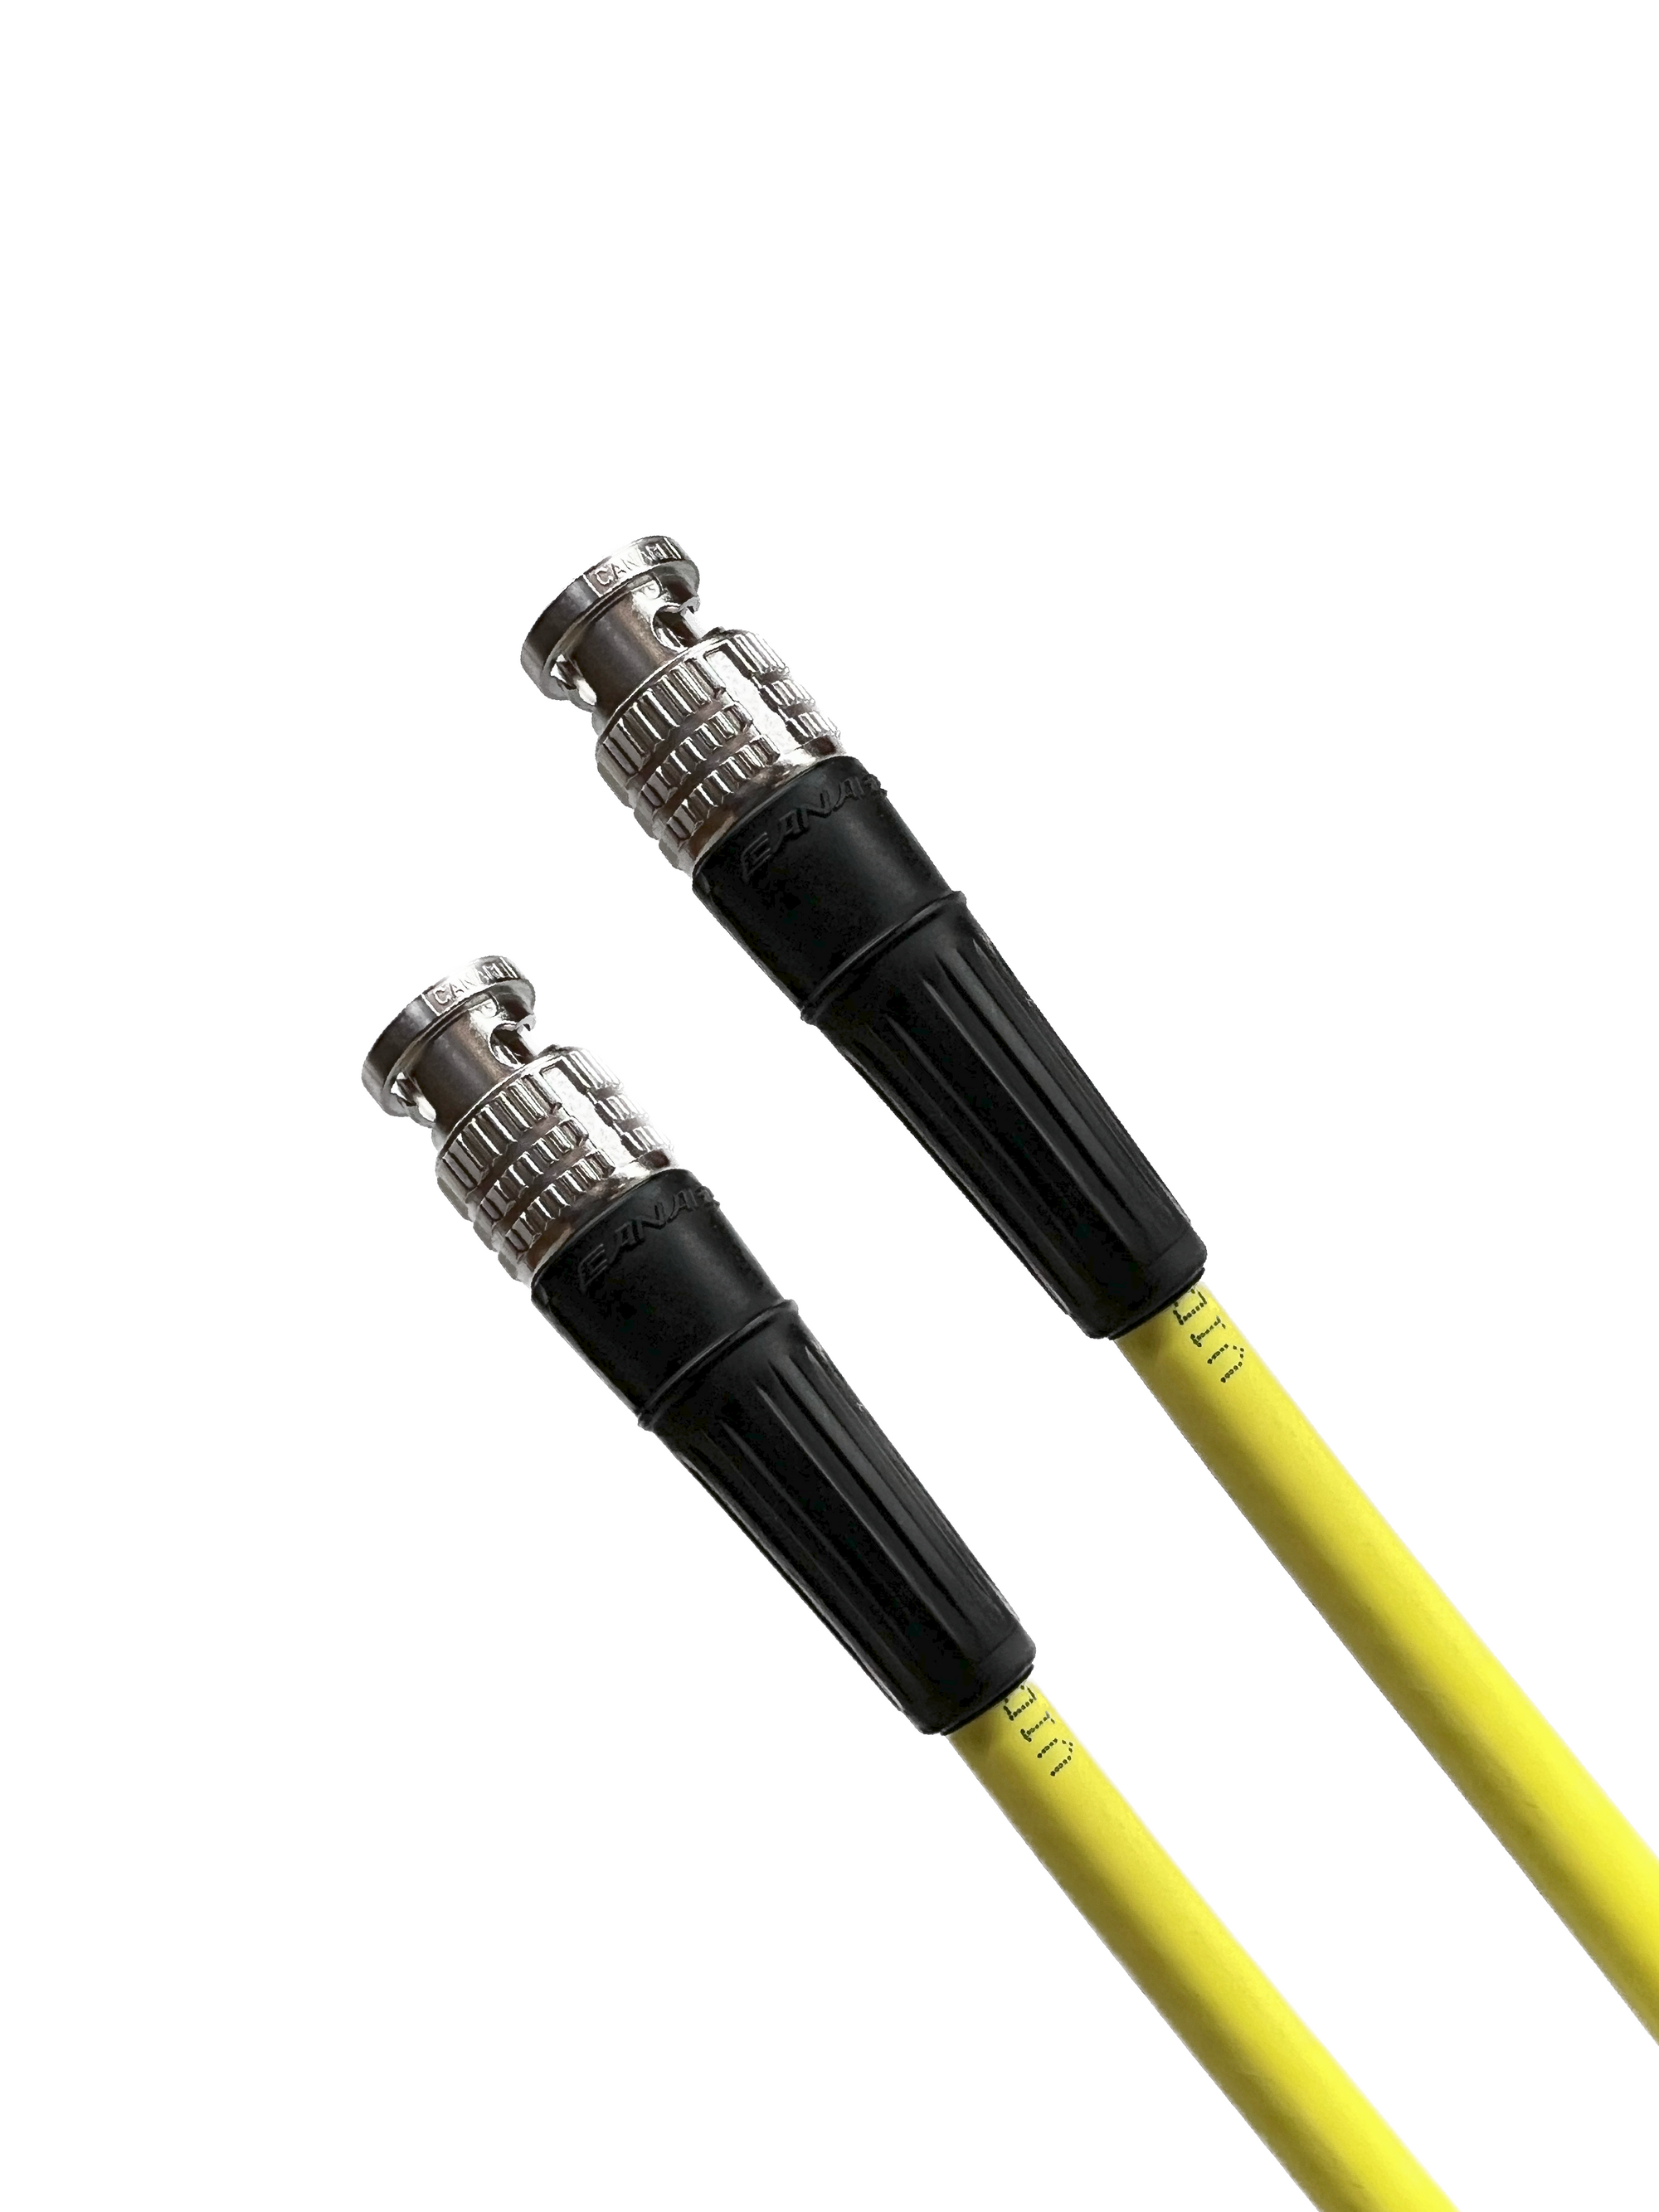 Belden 1694A 3G/6G HD-SDI RG6 BNC Cable with Canare BCP-B53 BNC